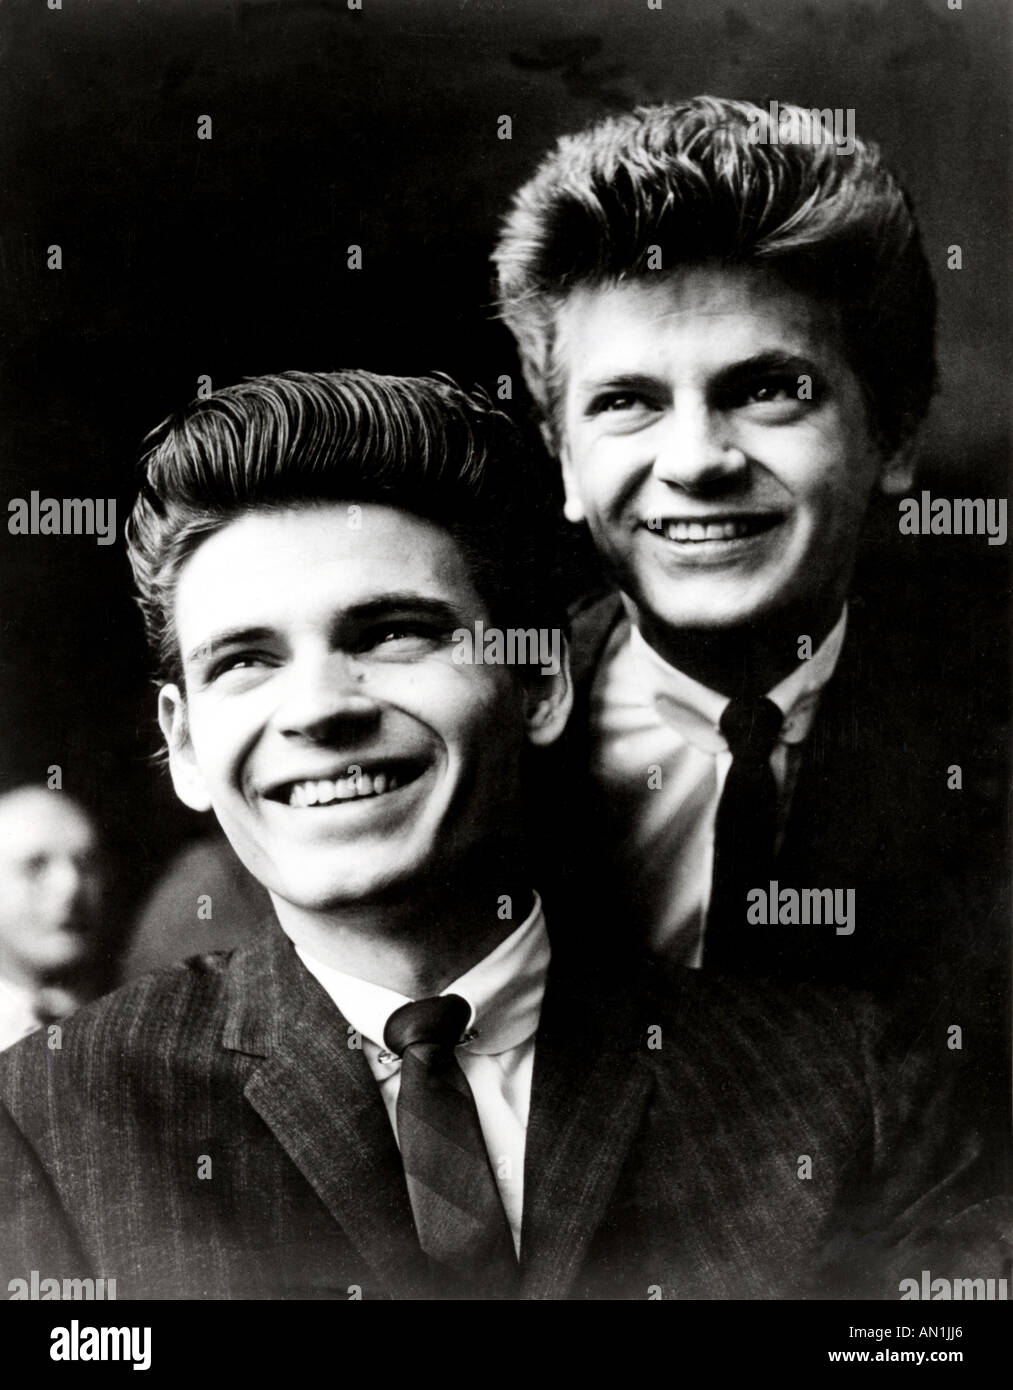 EVERLY BROTHERS uns pop-Duo mit Don links und Bruder Phil Stockfoto